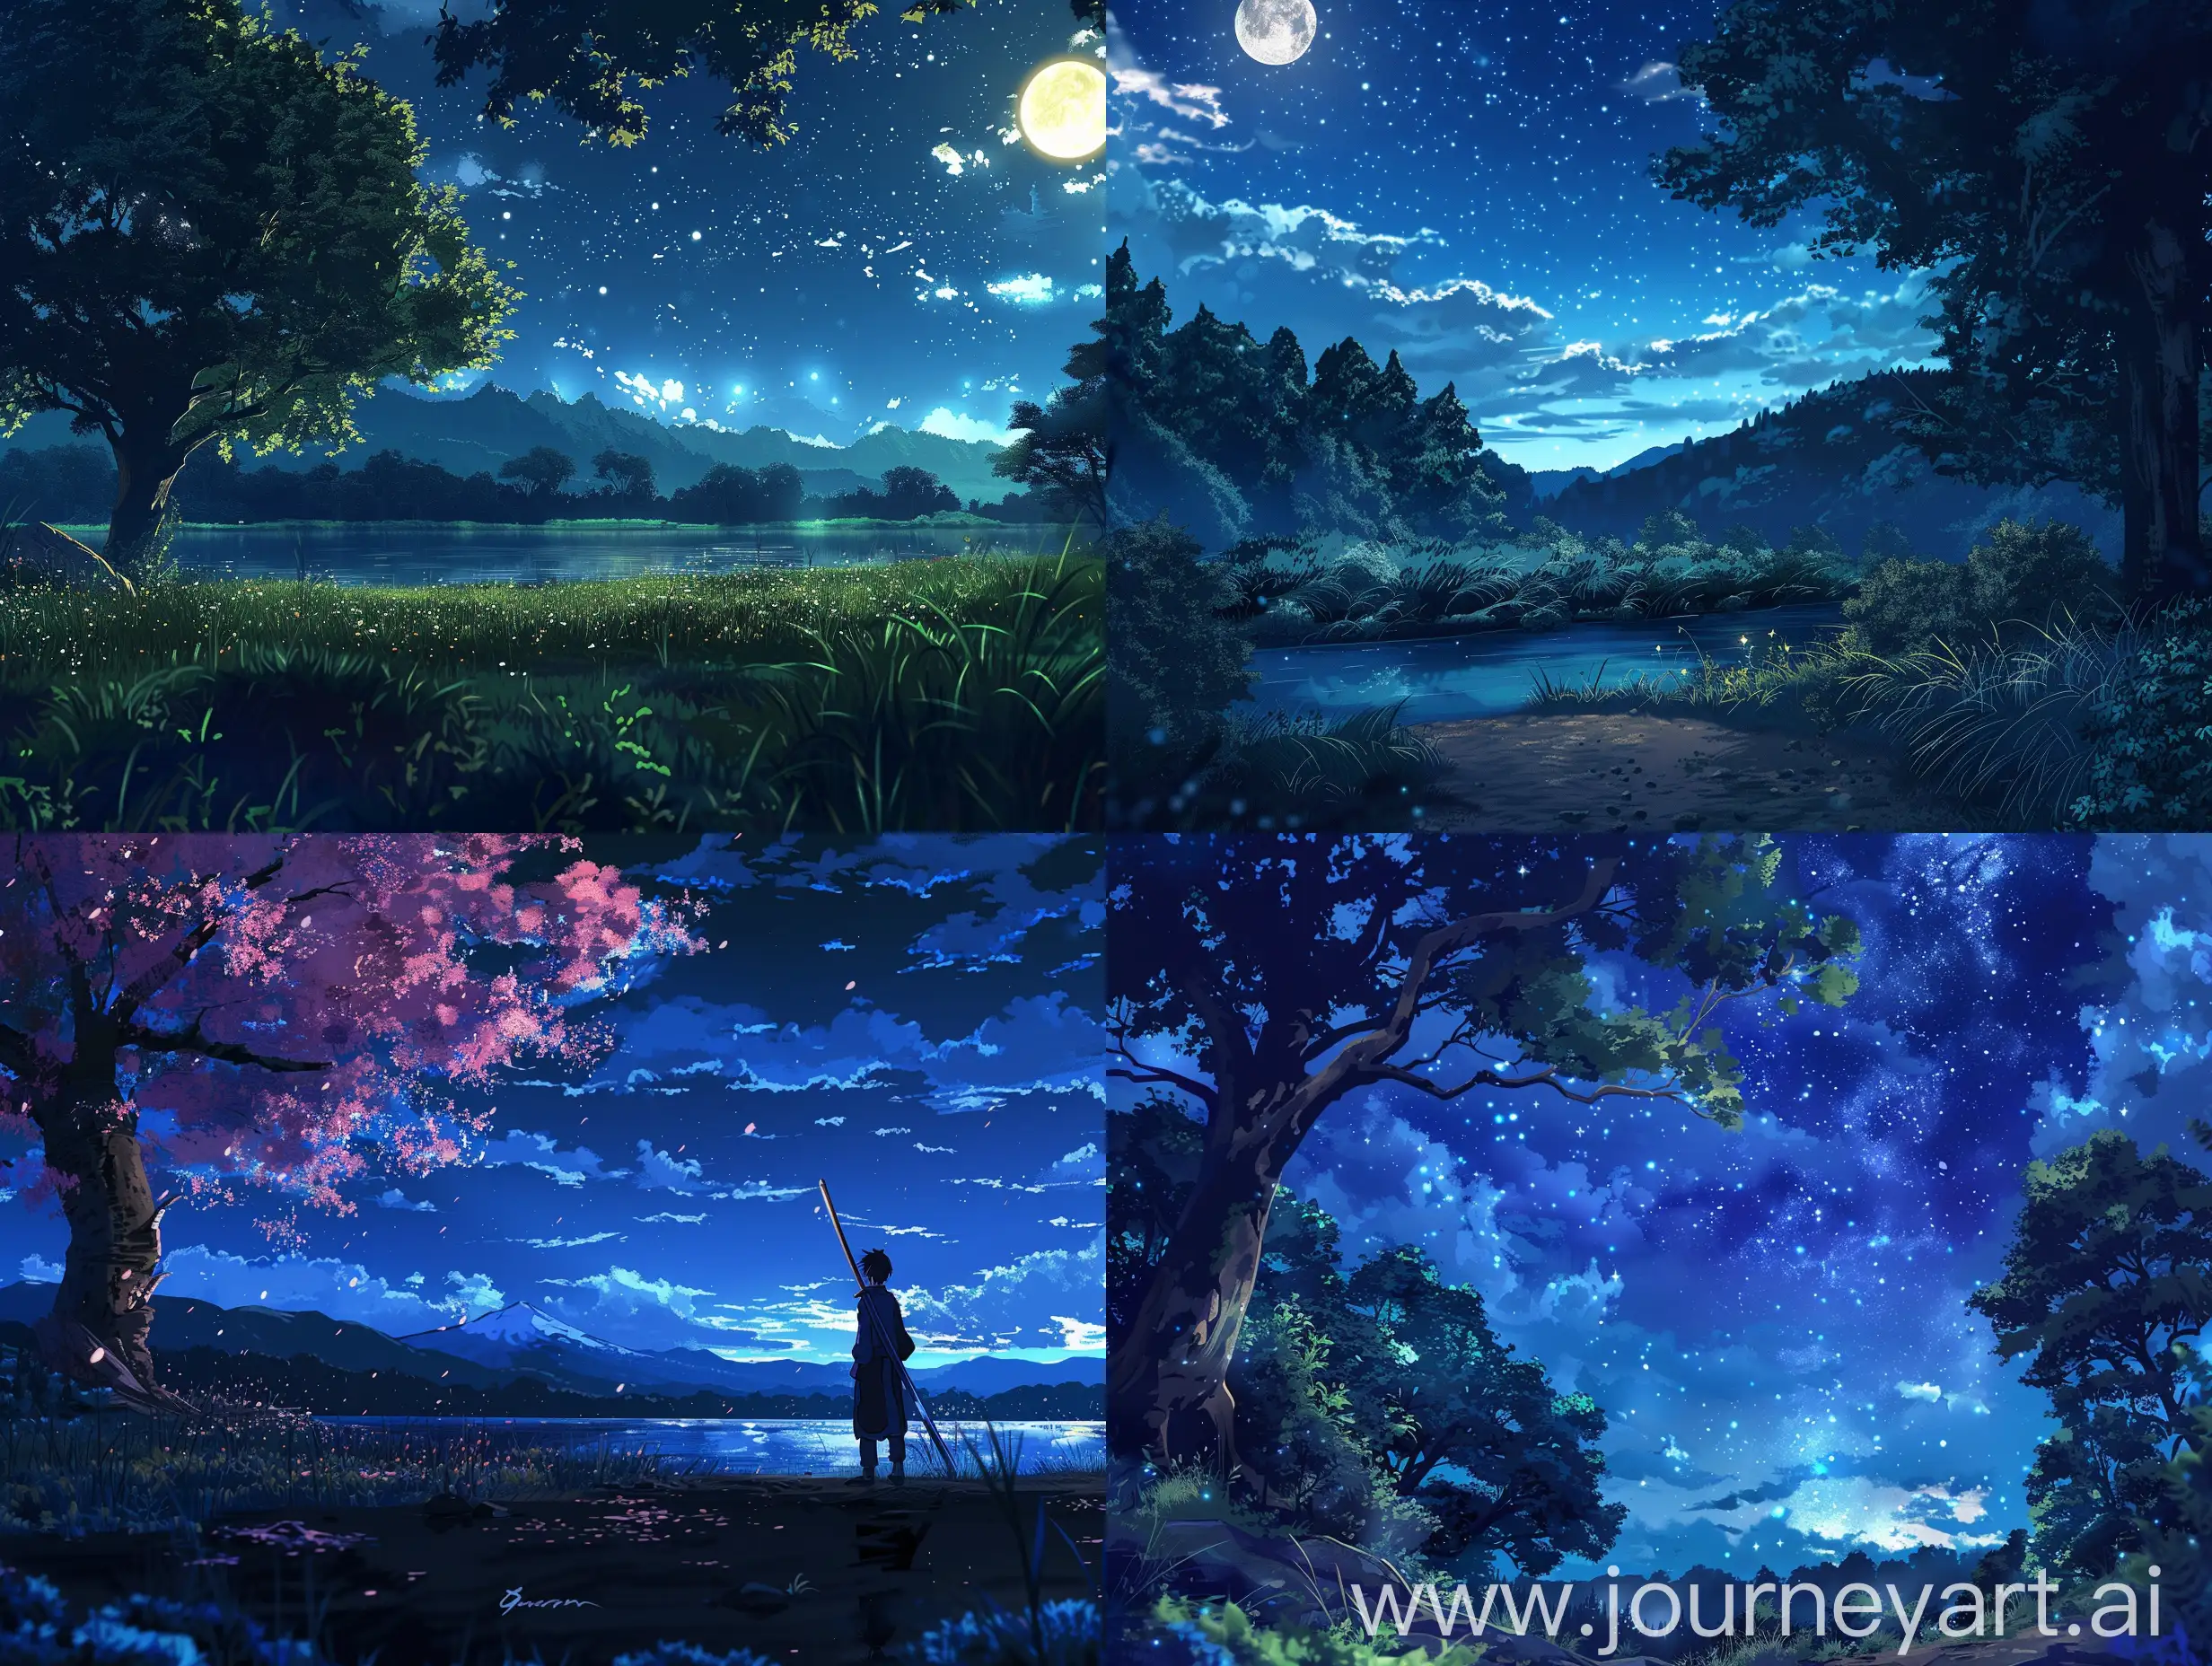 Mystical-Night-Adventure-in-Anime-Style-Resembling-Scenery-from-Sword-Art-Online-or-Your-Name